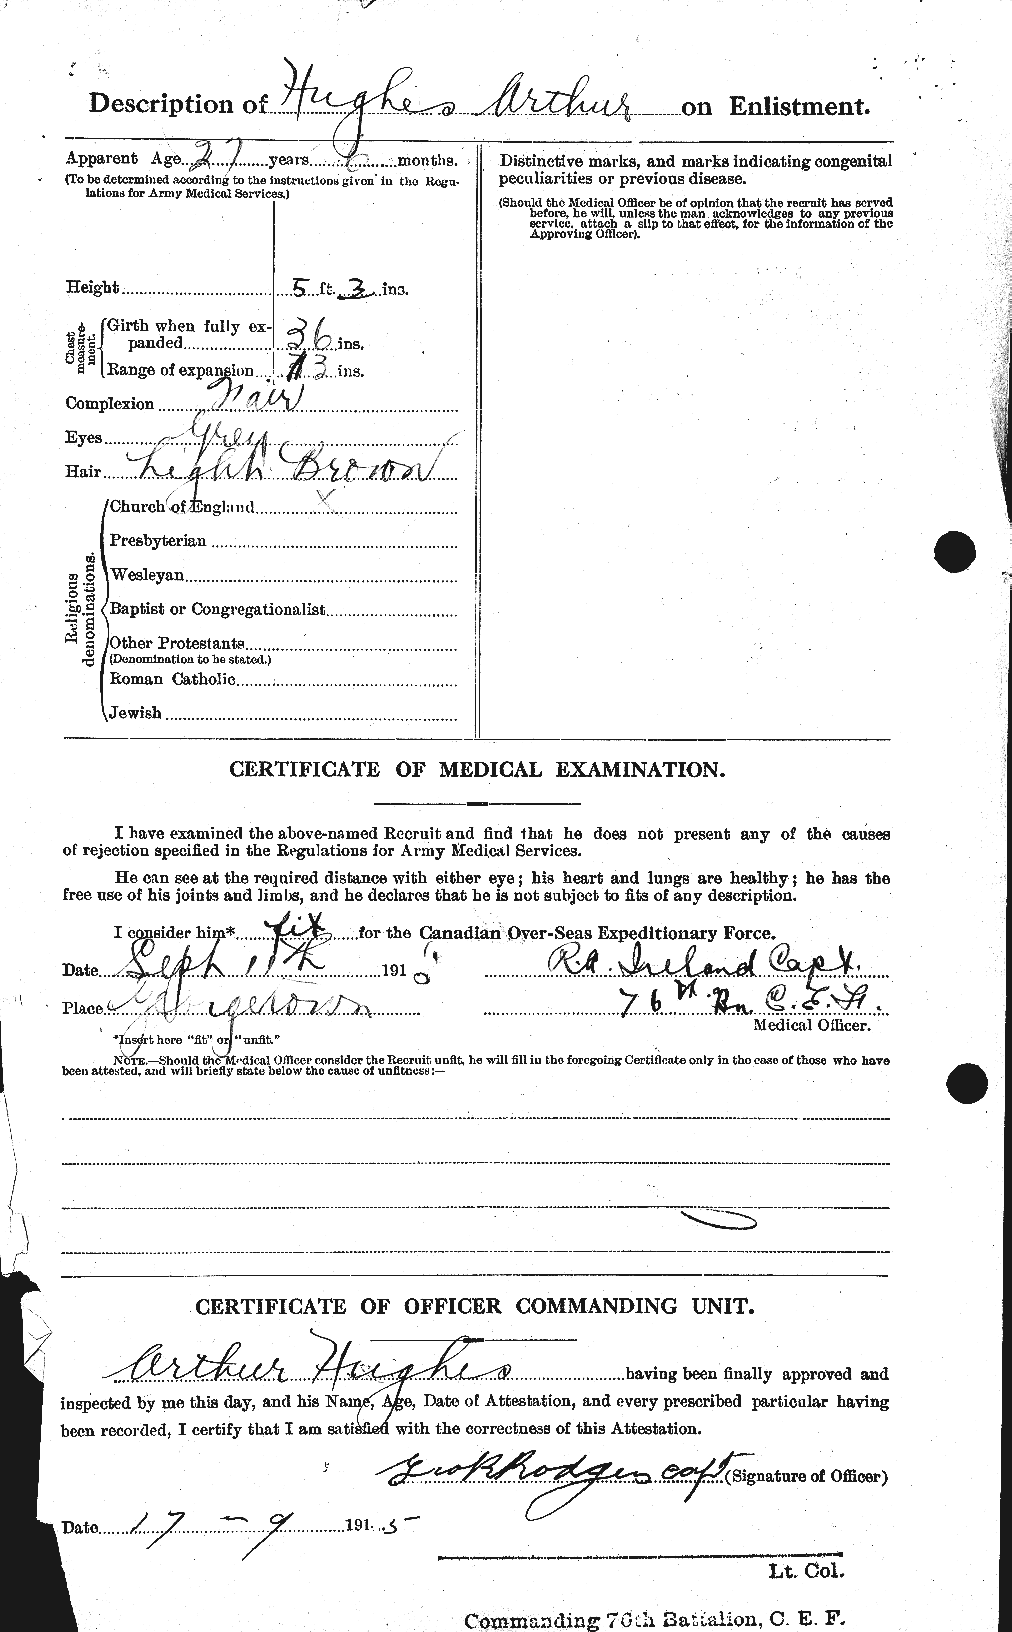 Personnel Records of the First World War - CEF 402560b